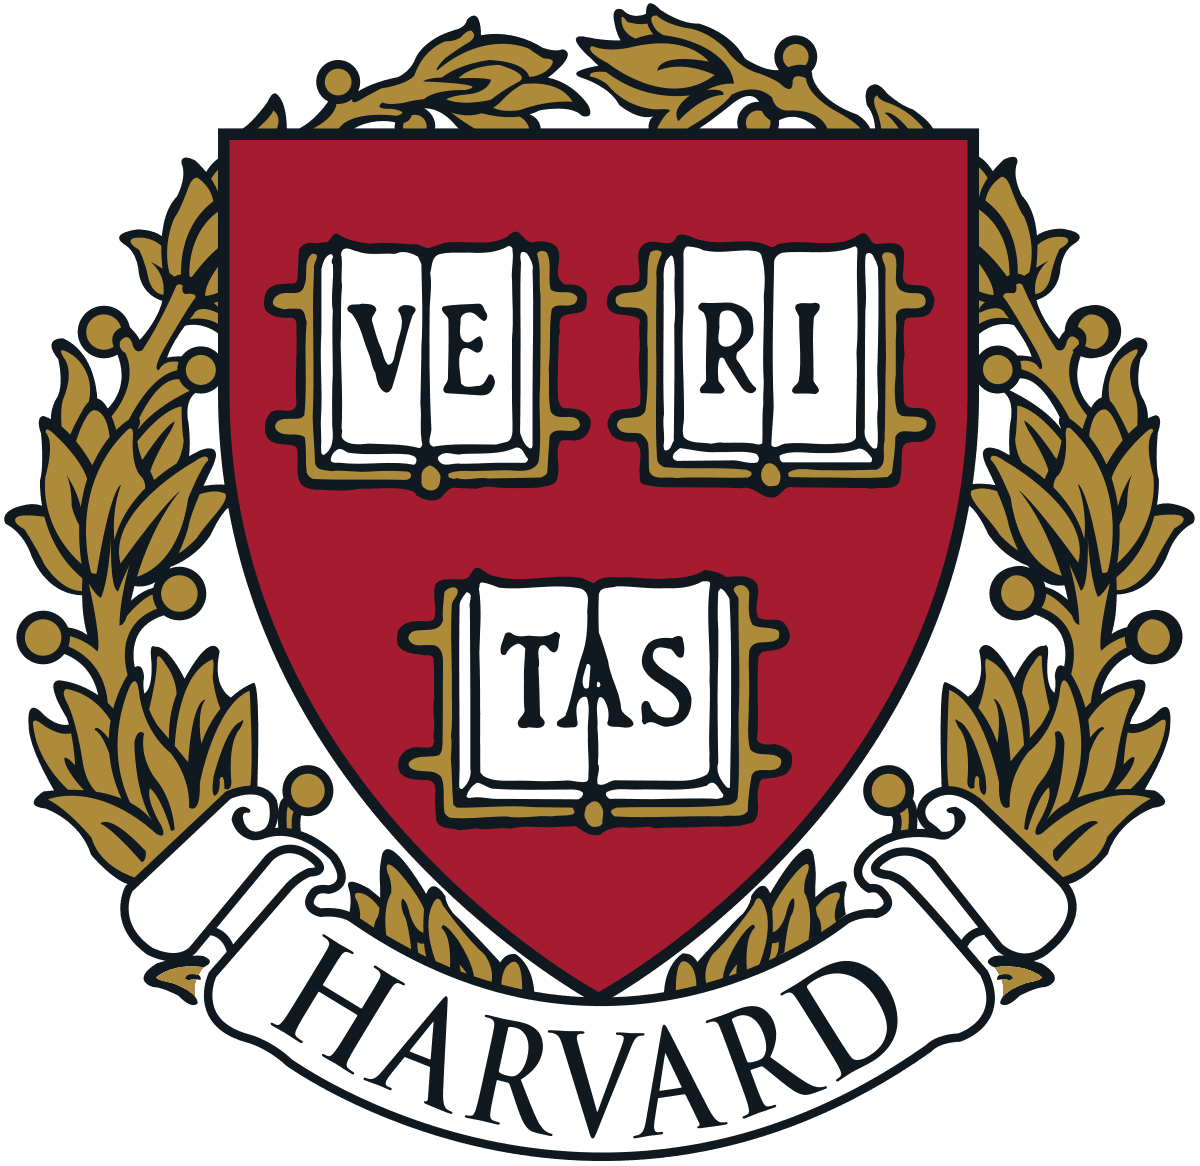 https://hermeticmobility.co.za/wp-content/uploads/sites/598/2020/06/harvard-logo.png